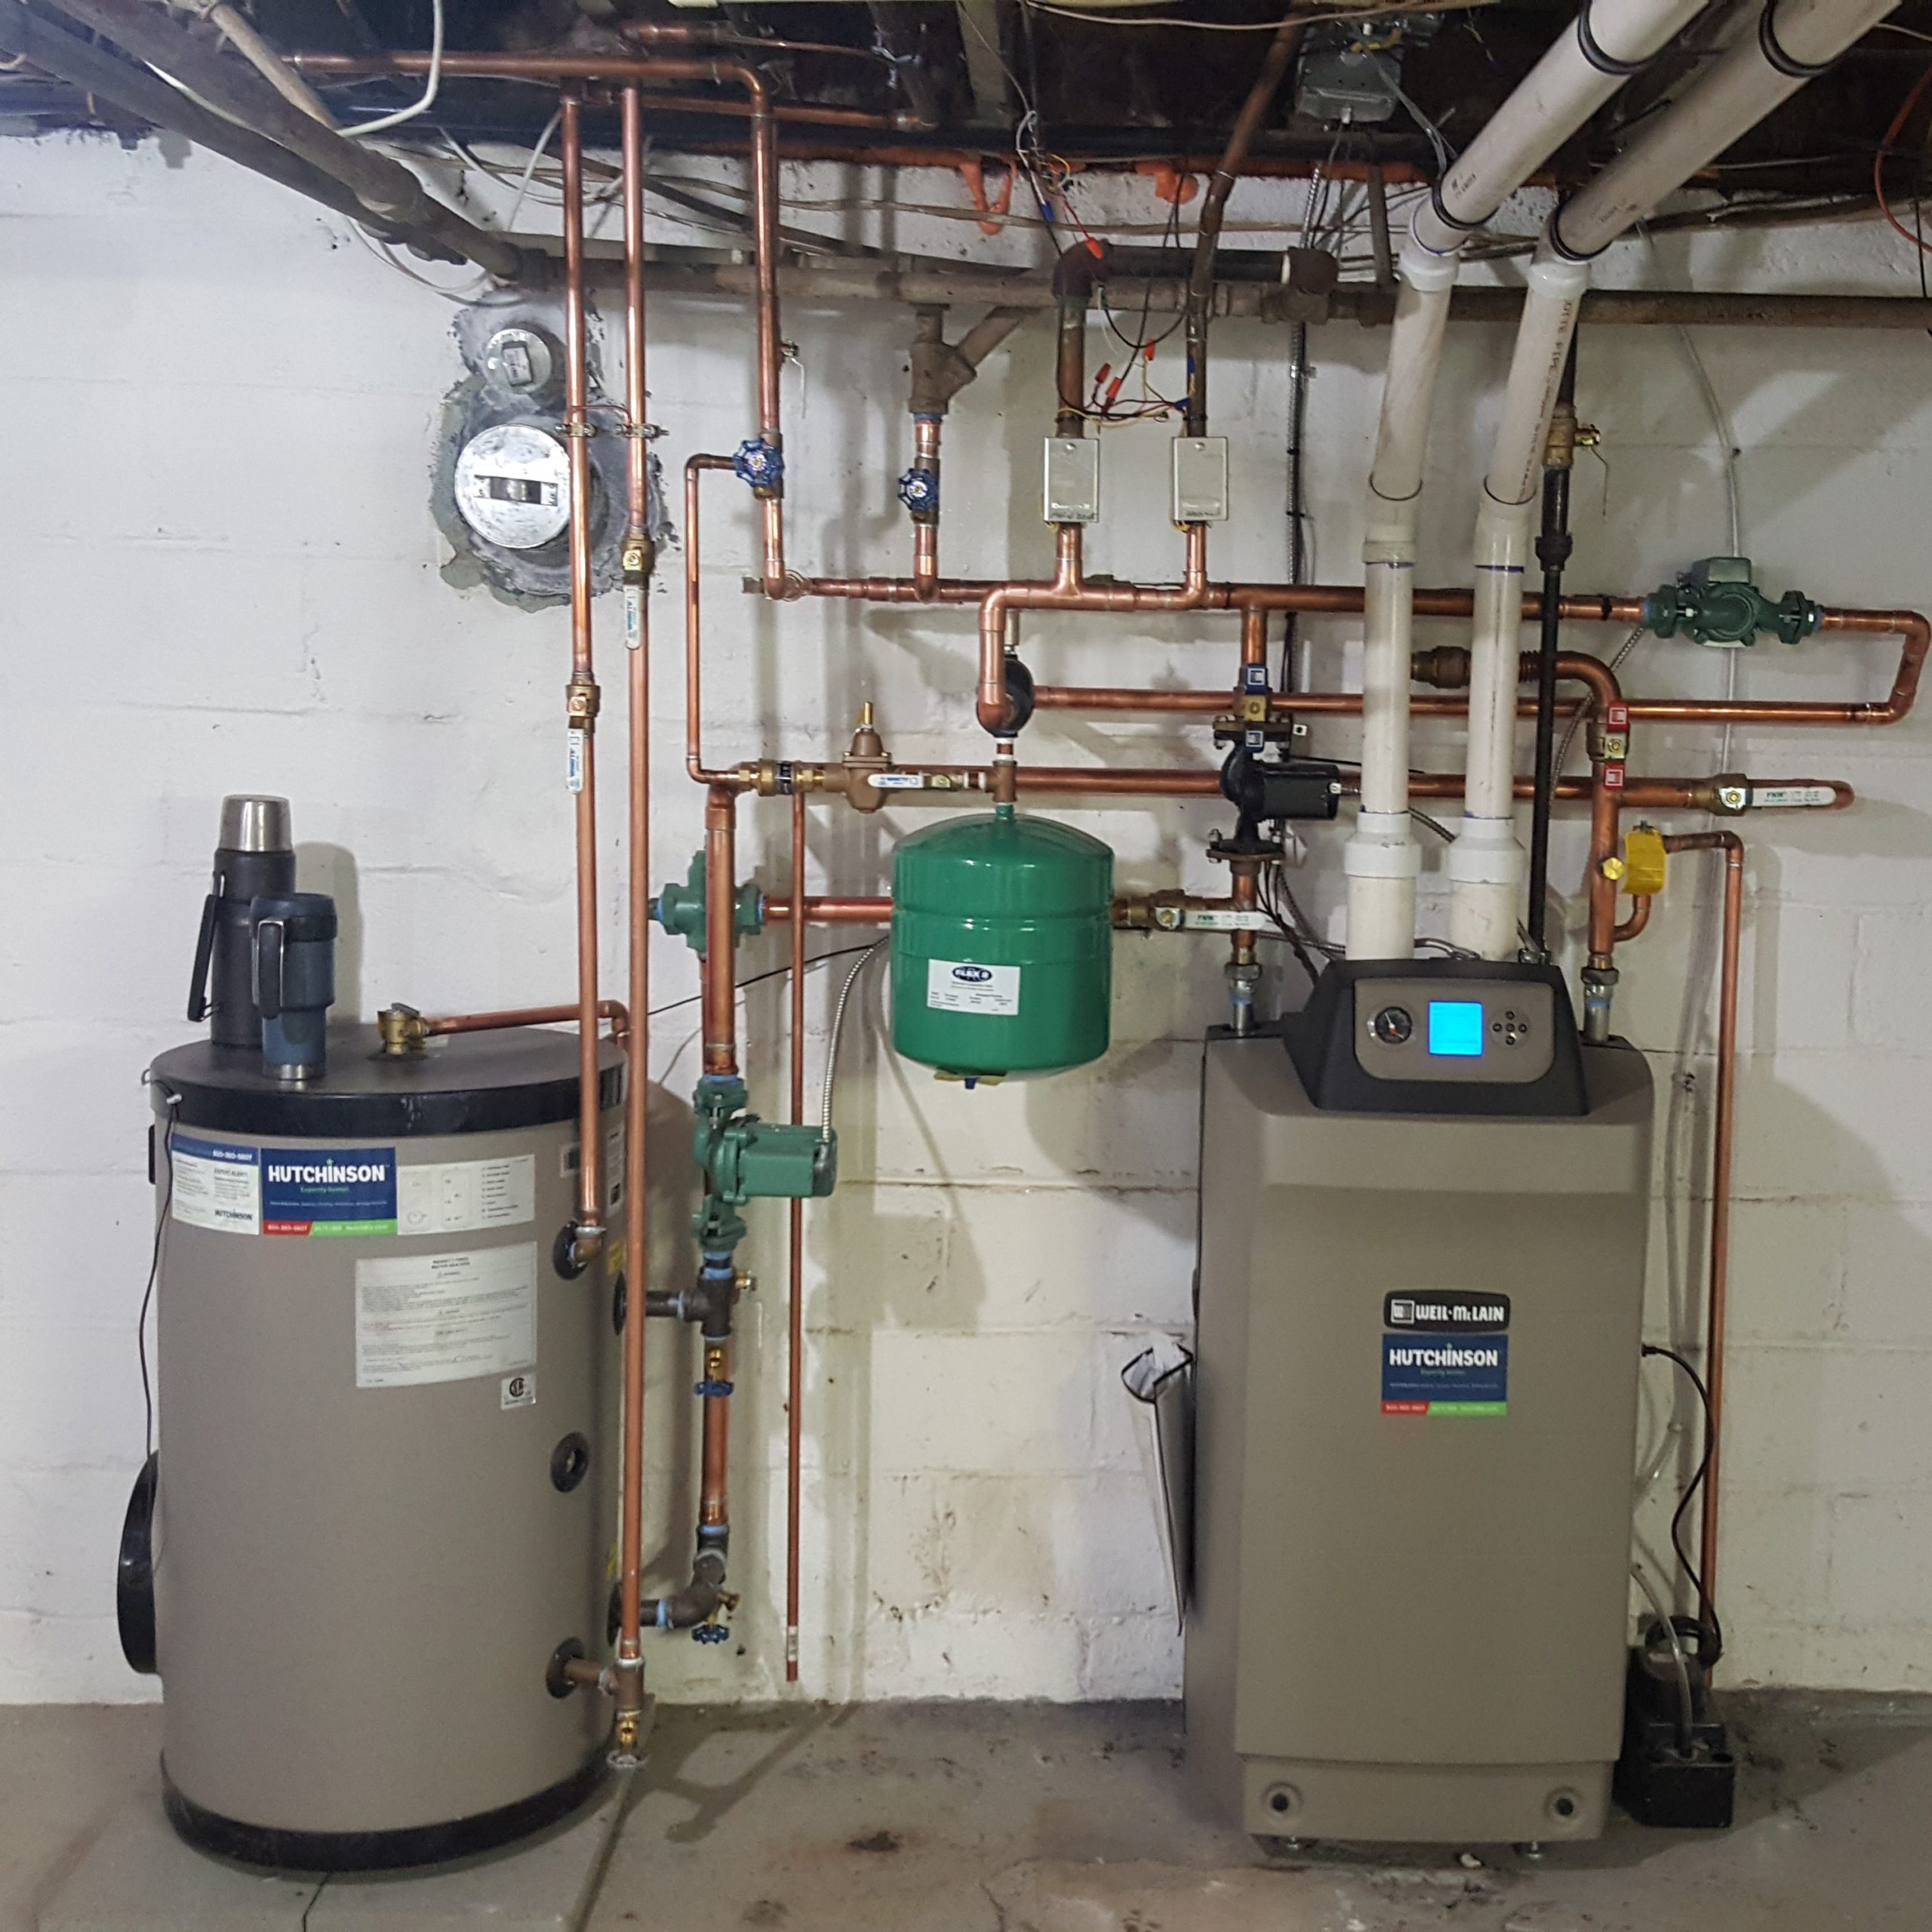 Plumbing, Heating and Air Conditioning Services in Feasterville, PA